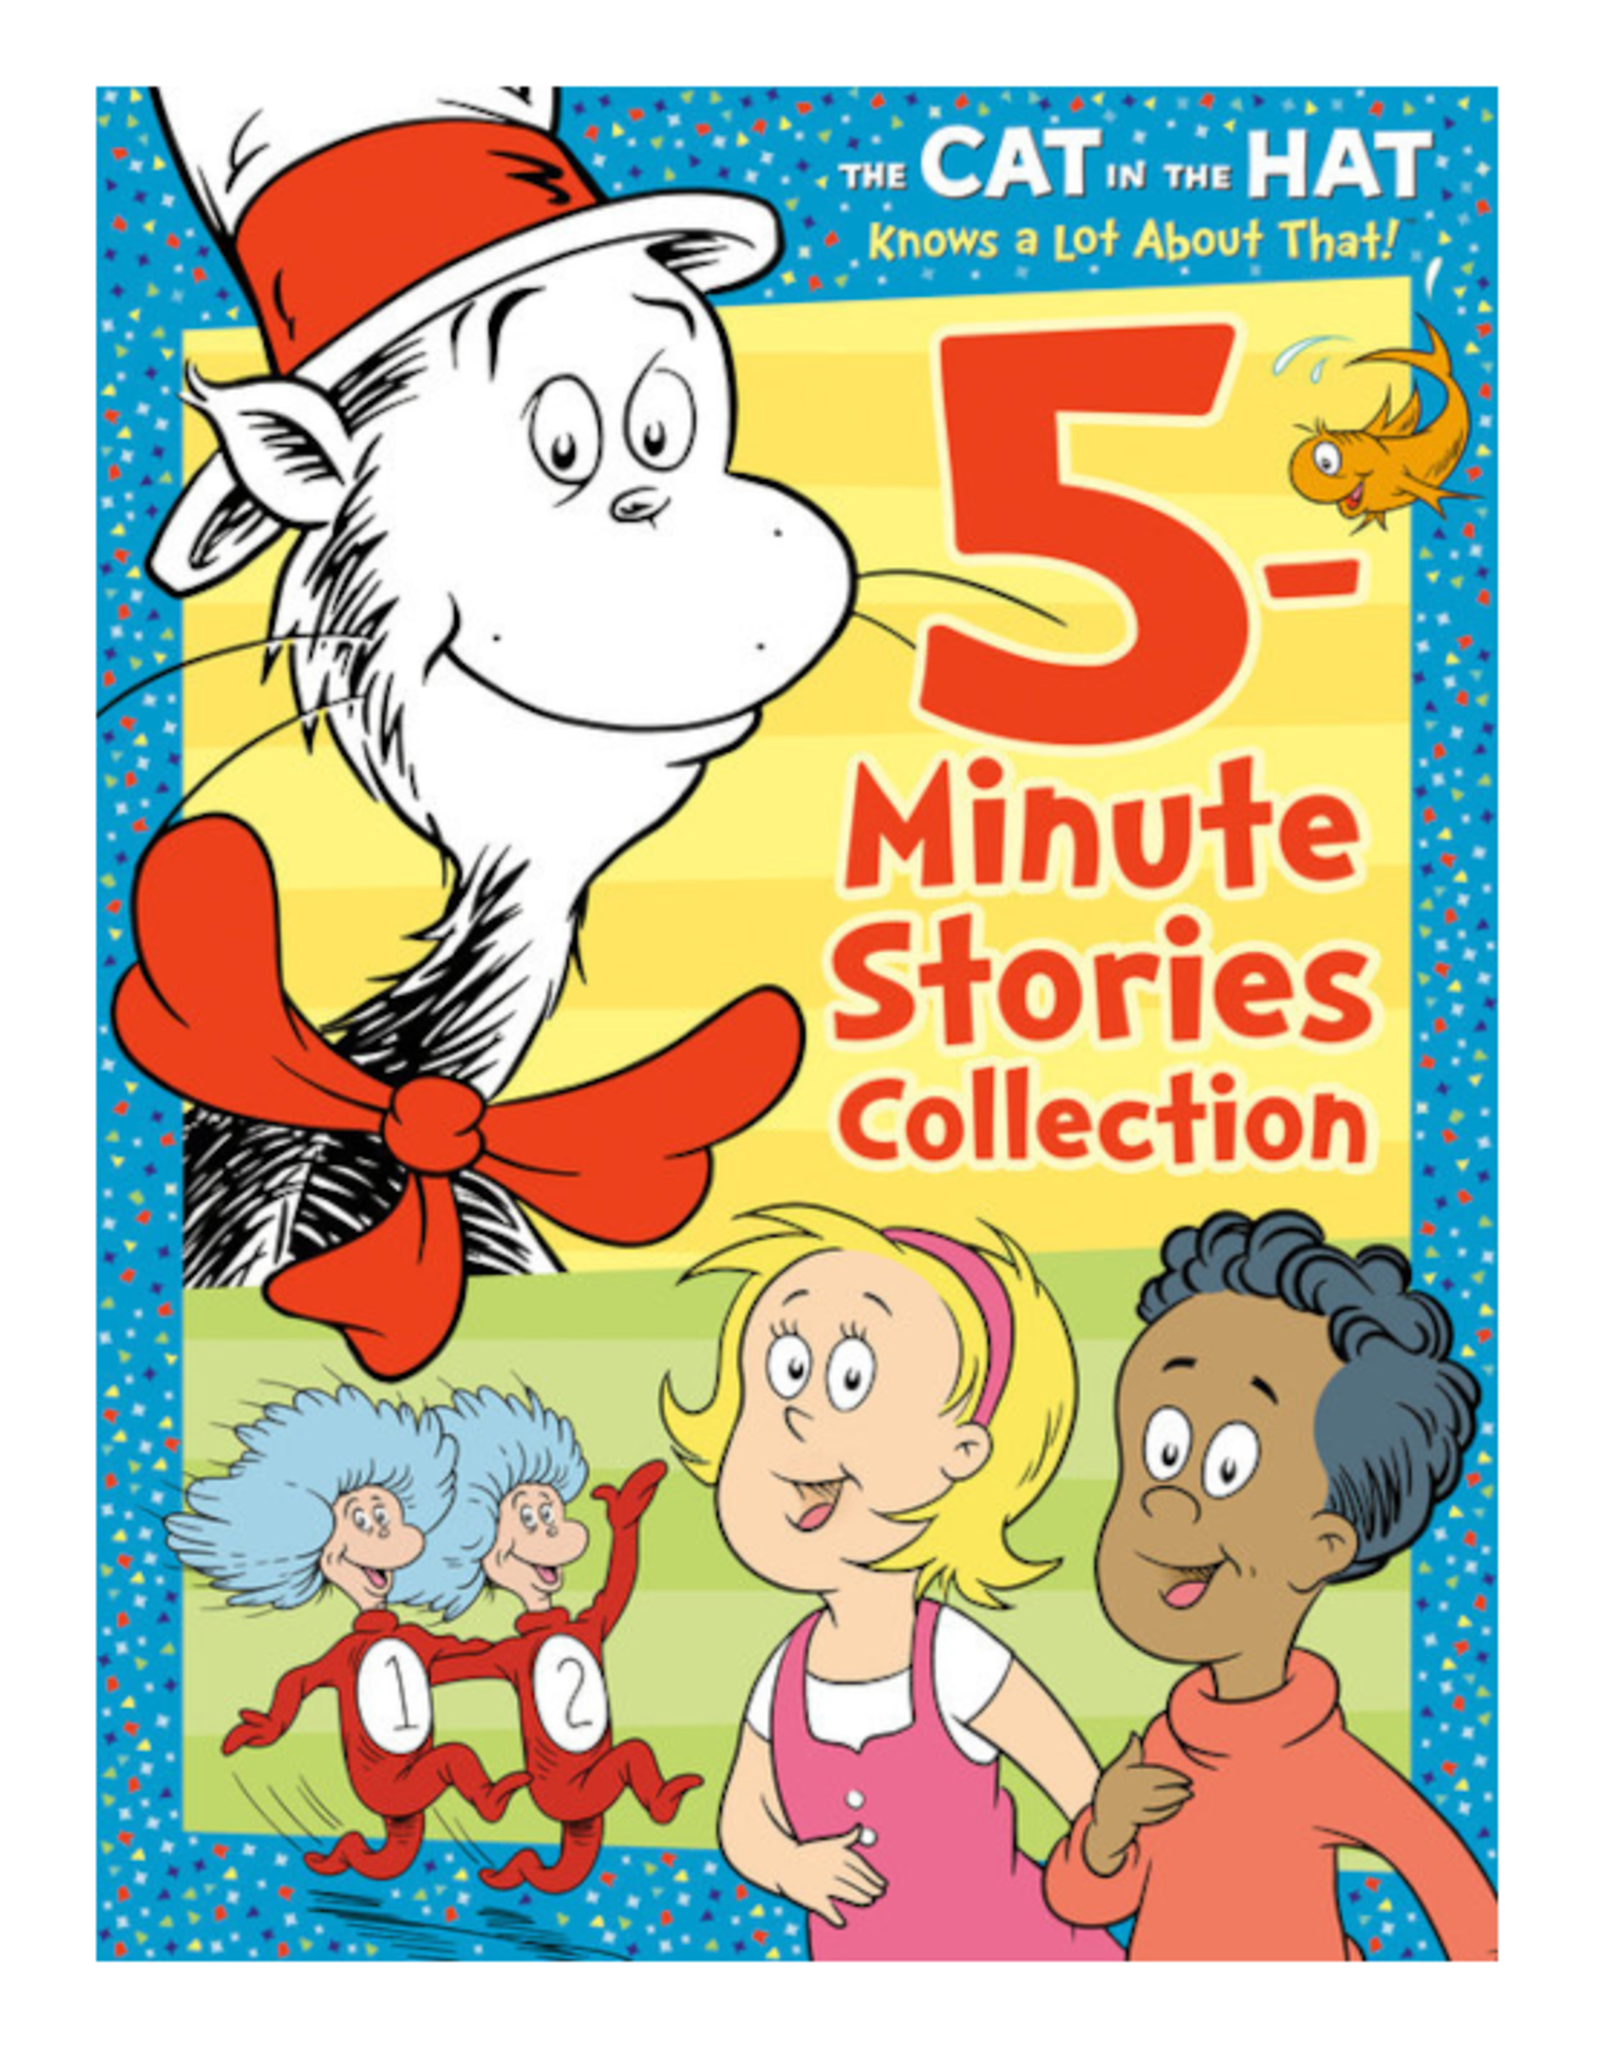 Penguin Random House Books Book - The Cat in the Hat Knows a Lot About That 5-Minute Stories Collection (Dr. Seuss /The Cat in the Hat Knows a Lot About That)